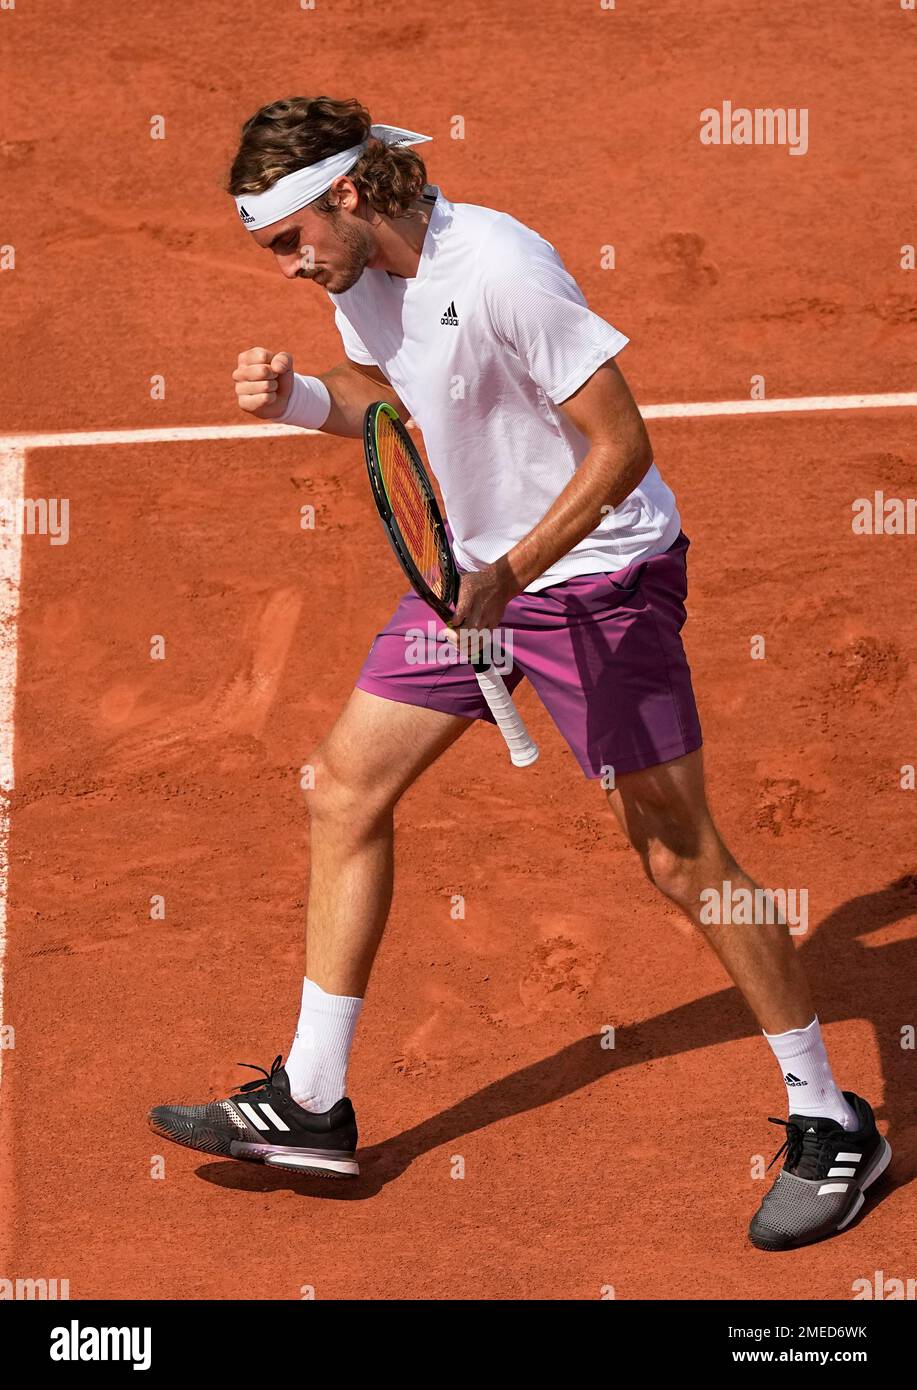 Stefanos Tsitsipas of Greece p celebrates after winning a point against  Spain's Pedro Martinez during their second round match on day four of the  French Open tennis tournament at Roland Garros in